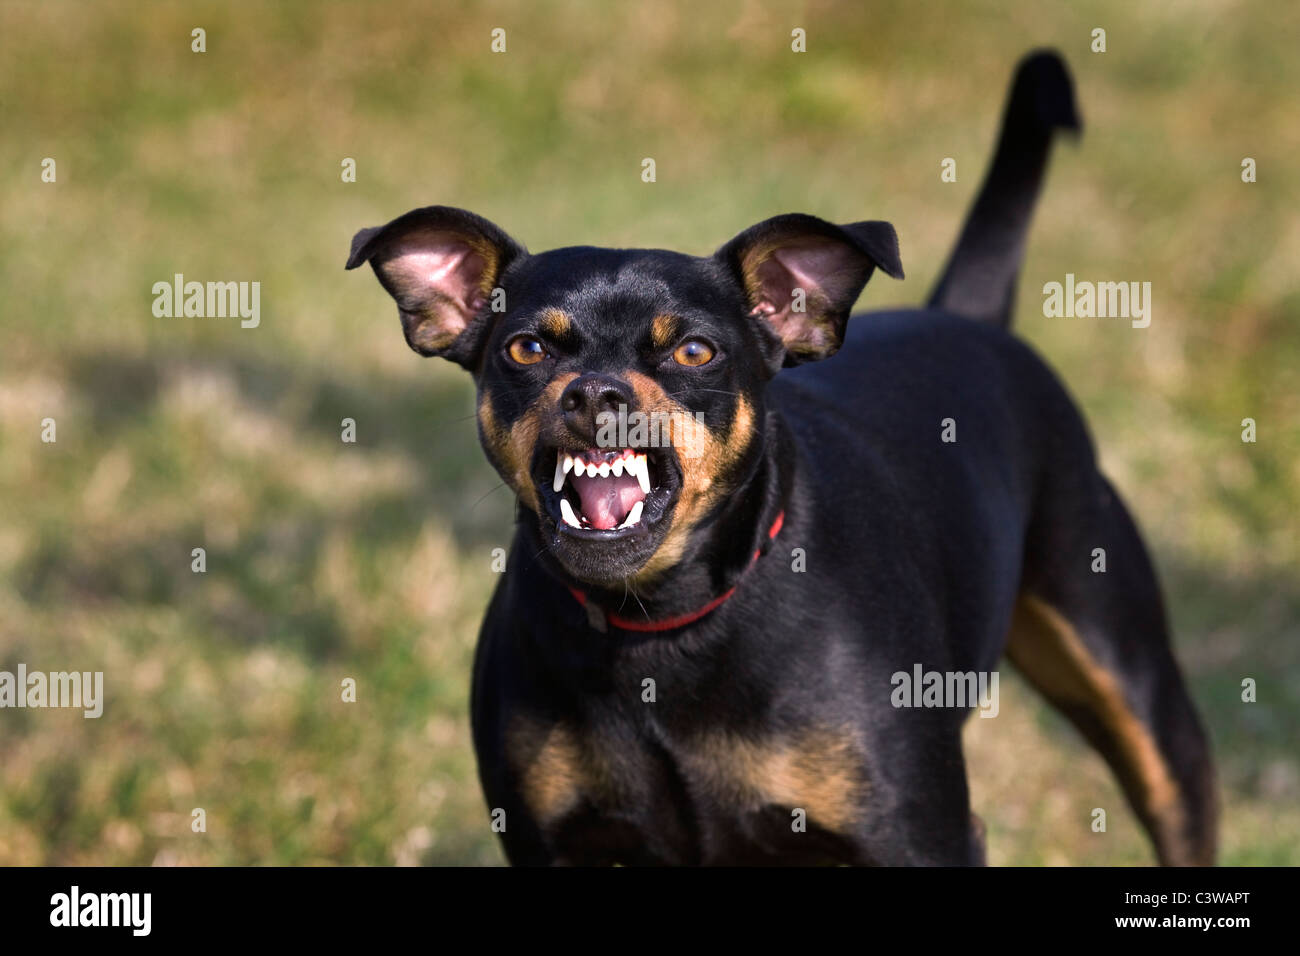 Manchester Terrier (Canis lupus familiaris) showing teeth while growling Stock Photo